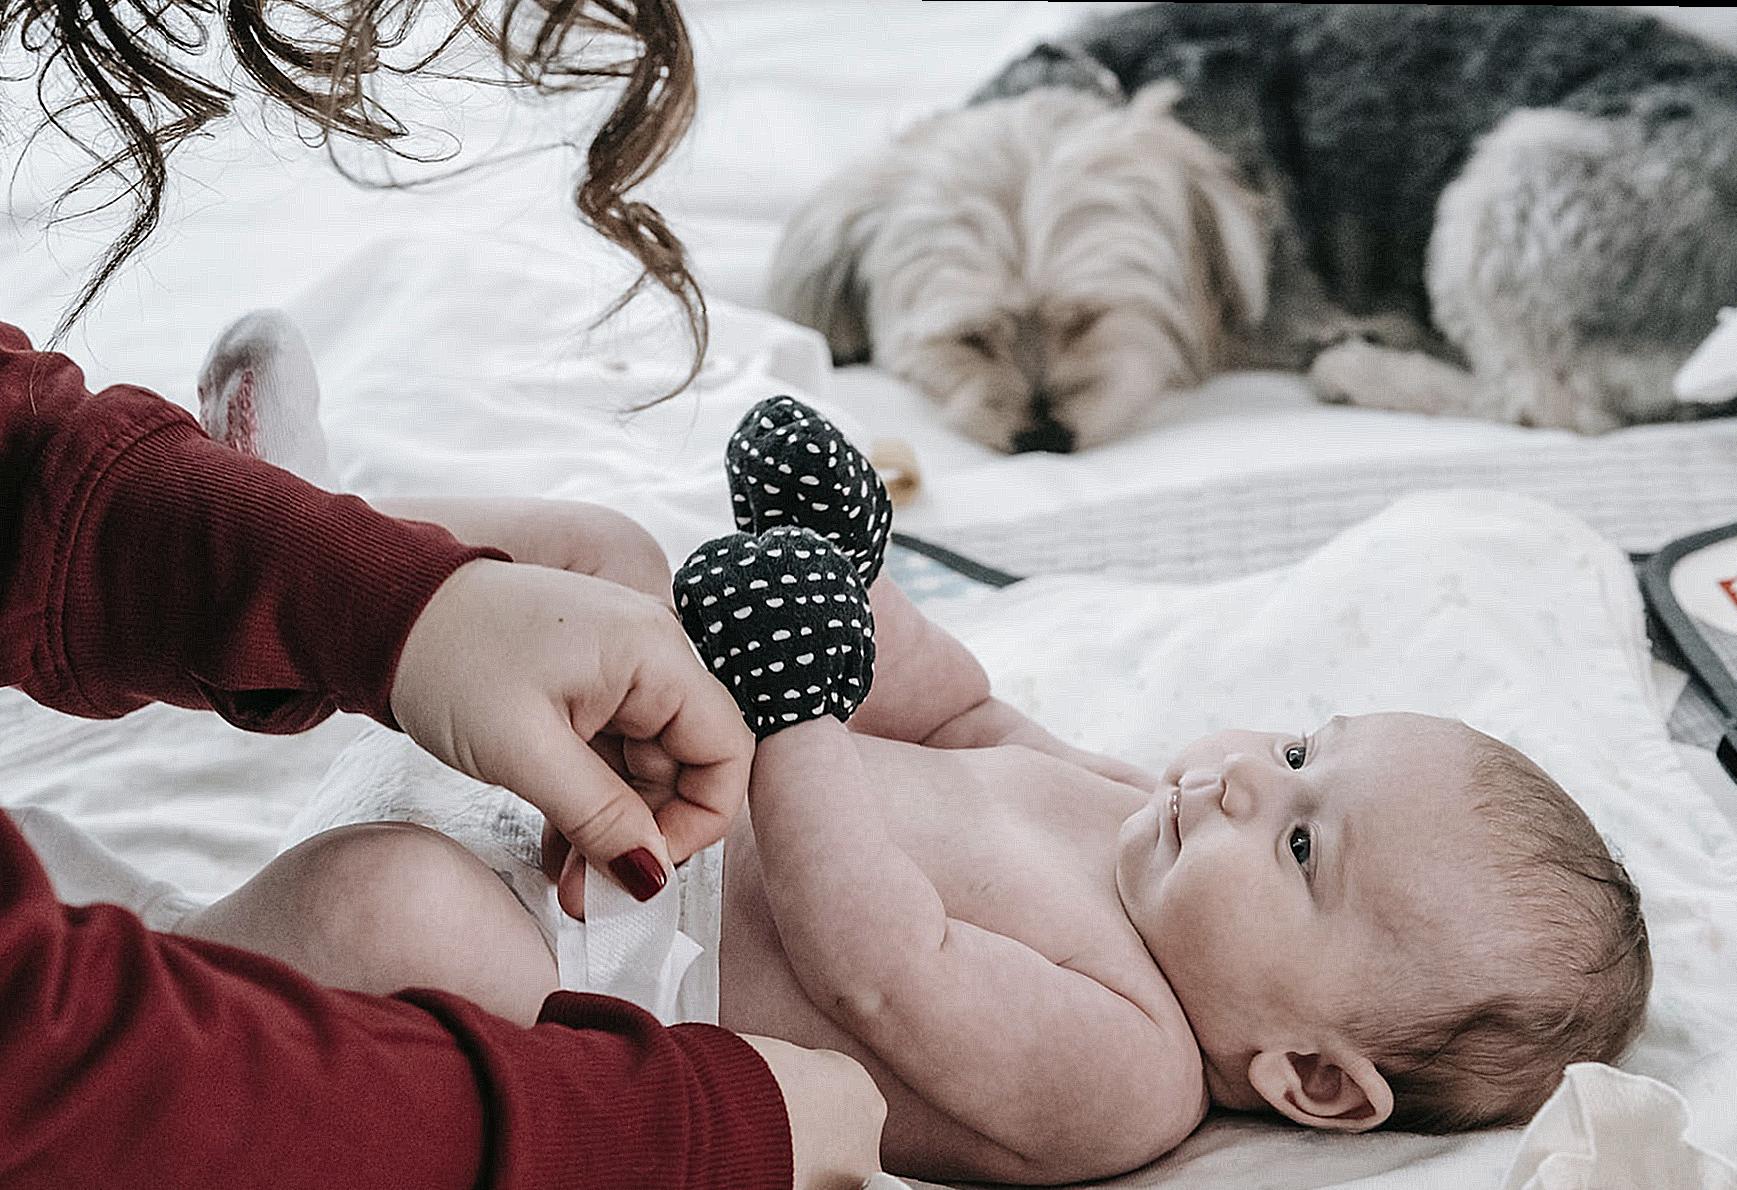 Crop anonymous mother putting on diaper on adorable infant baby wearing anti scratching mittens while lying on comfortable couch near hairy dog in light room